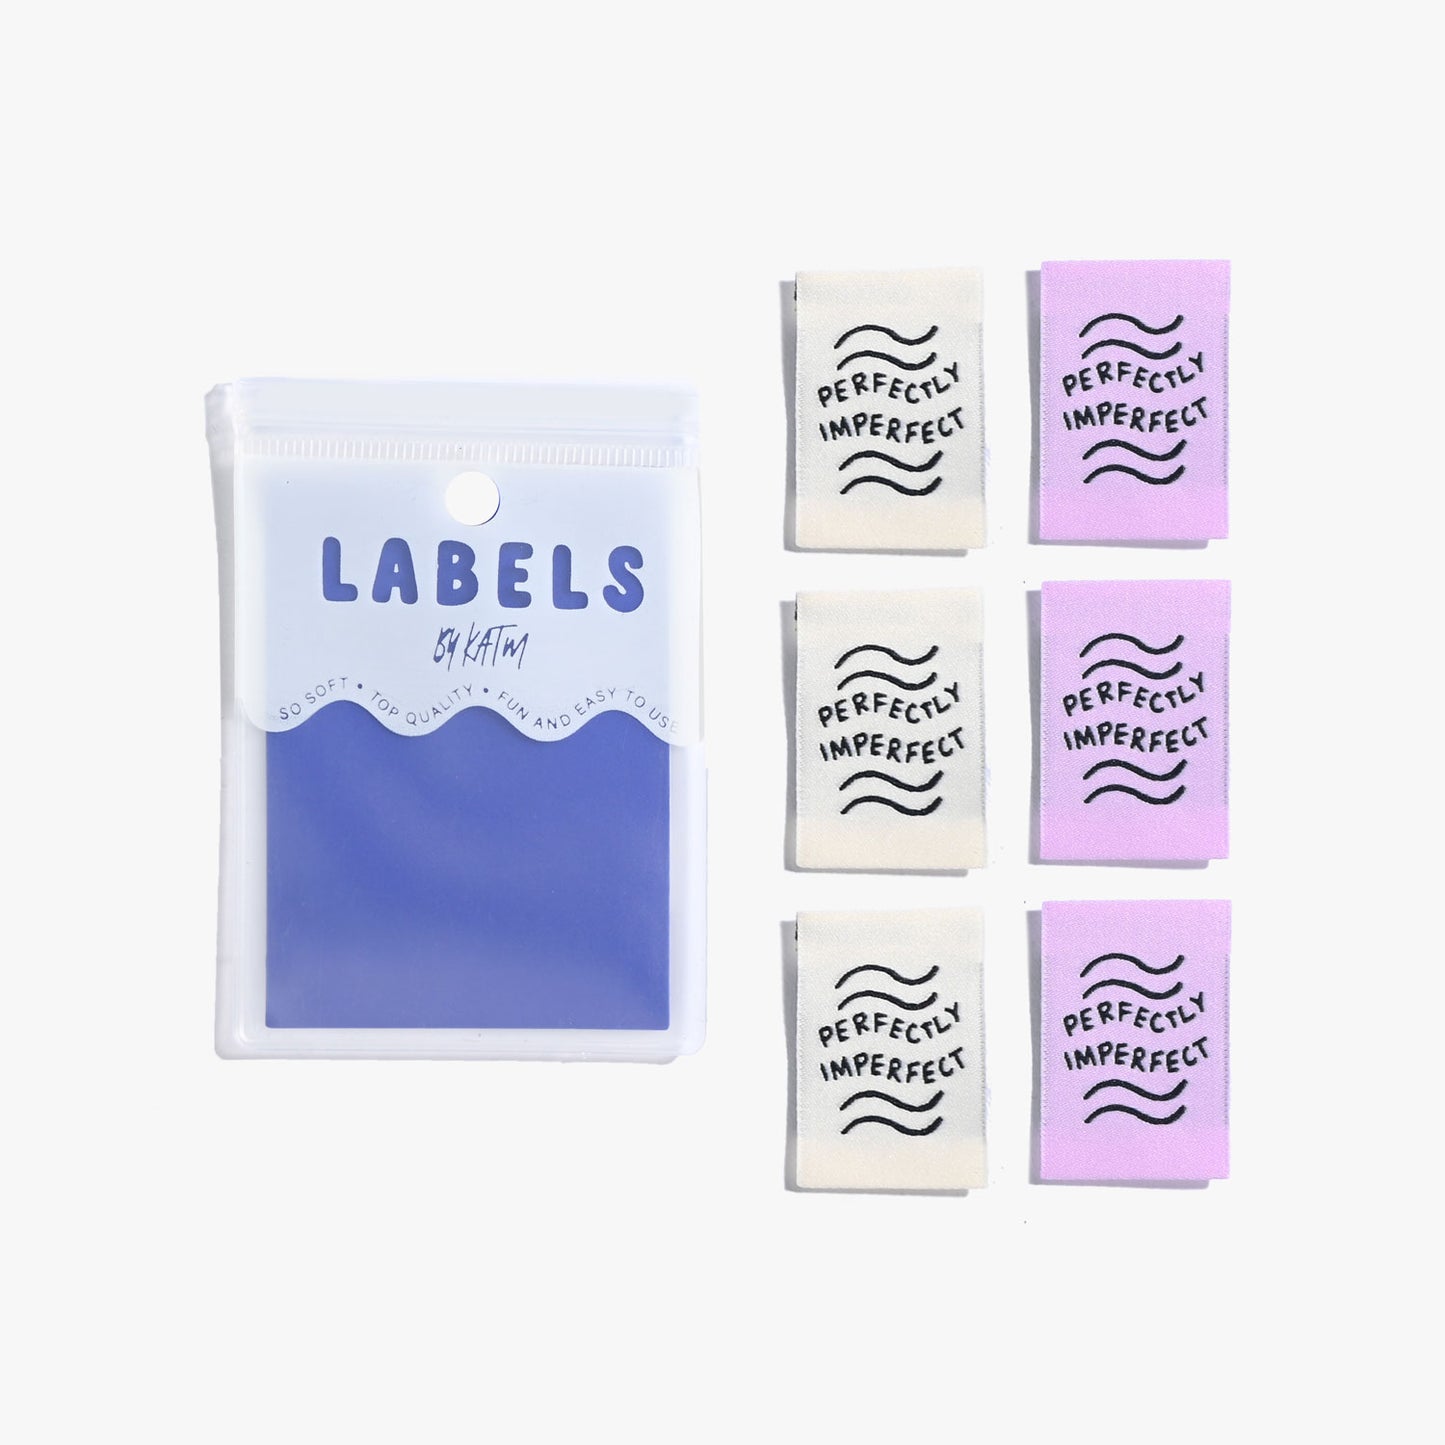 Perfectly Imperfect - Woven Labels